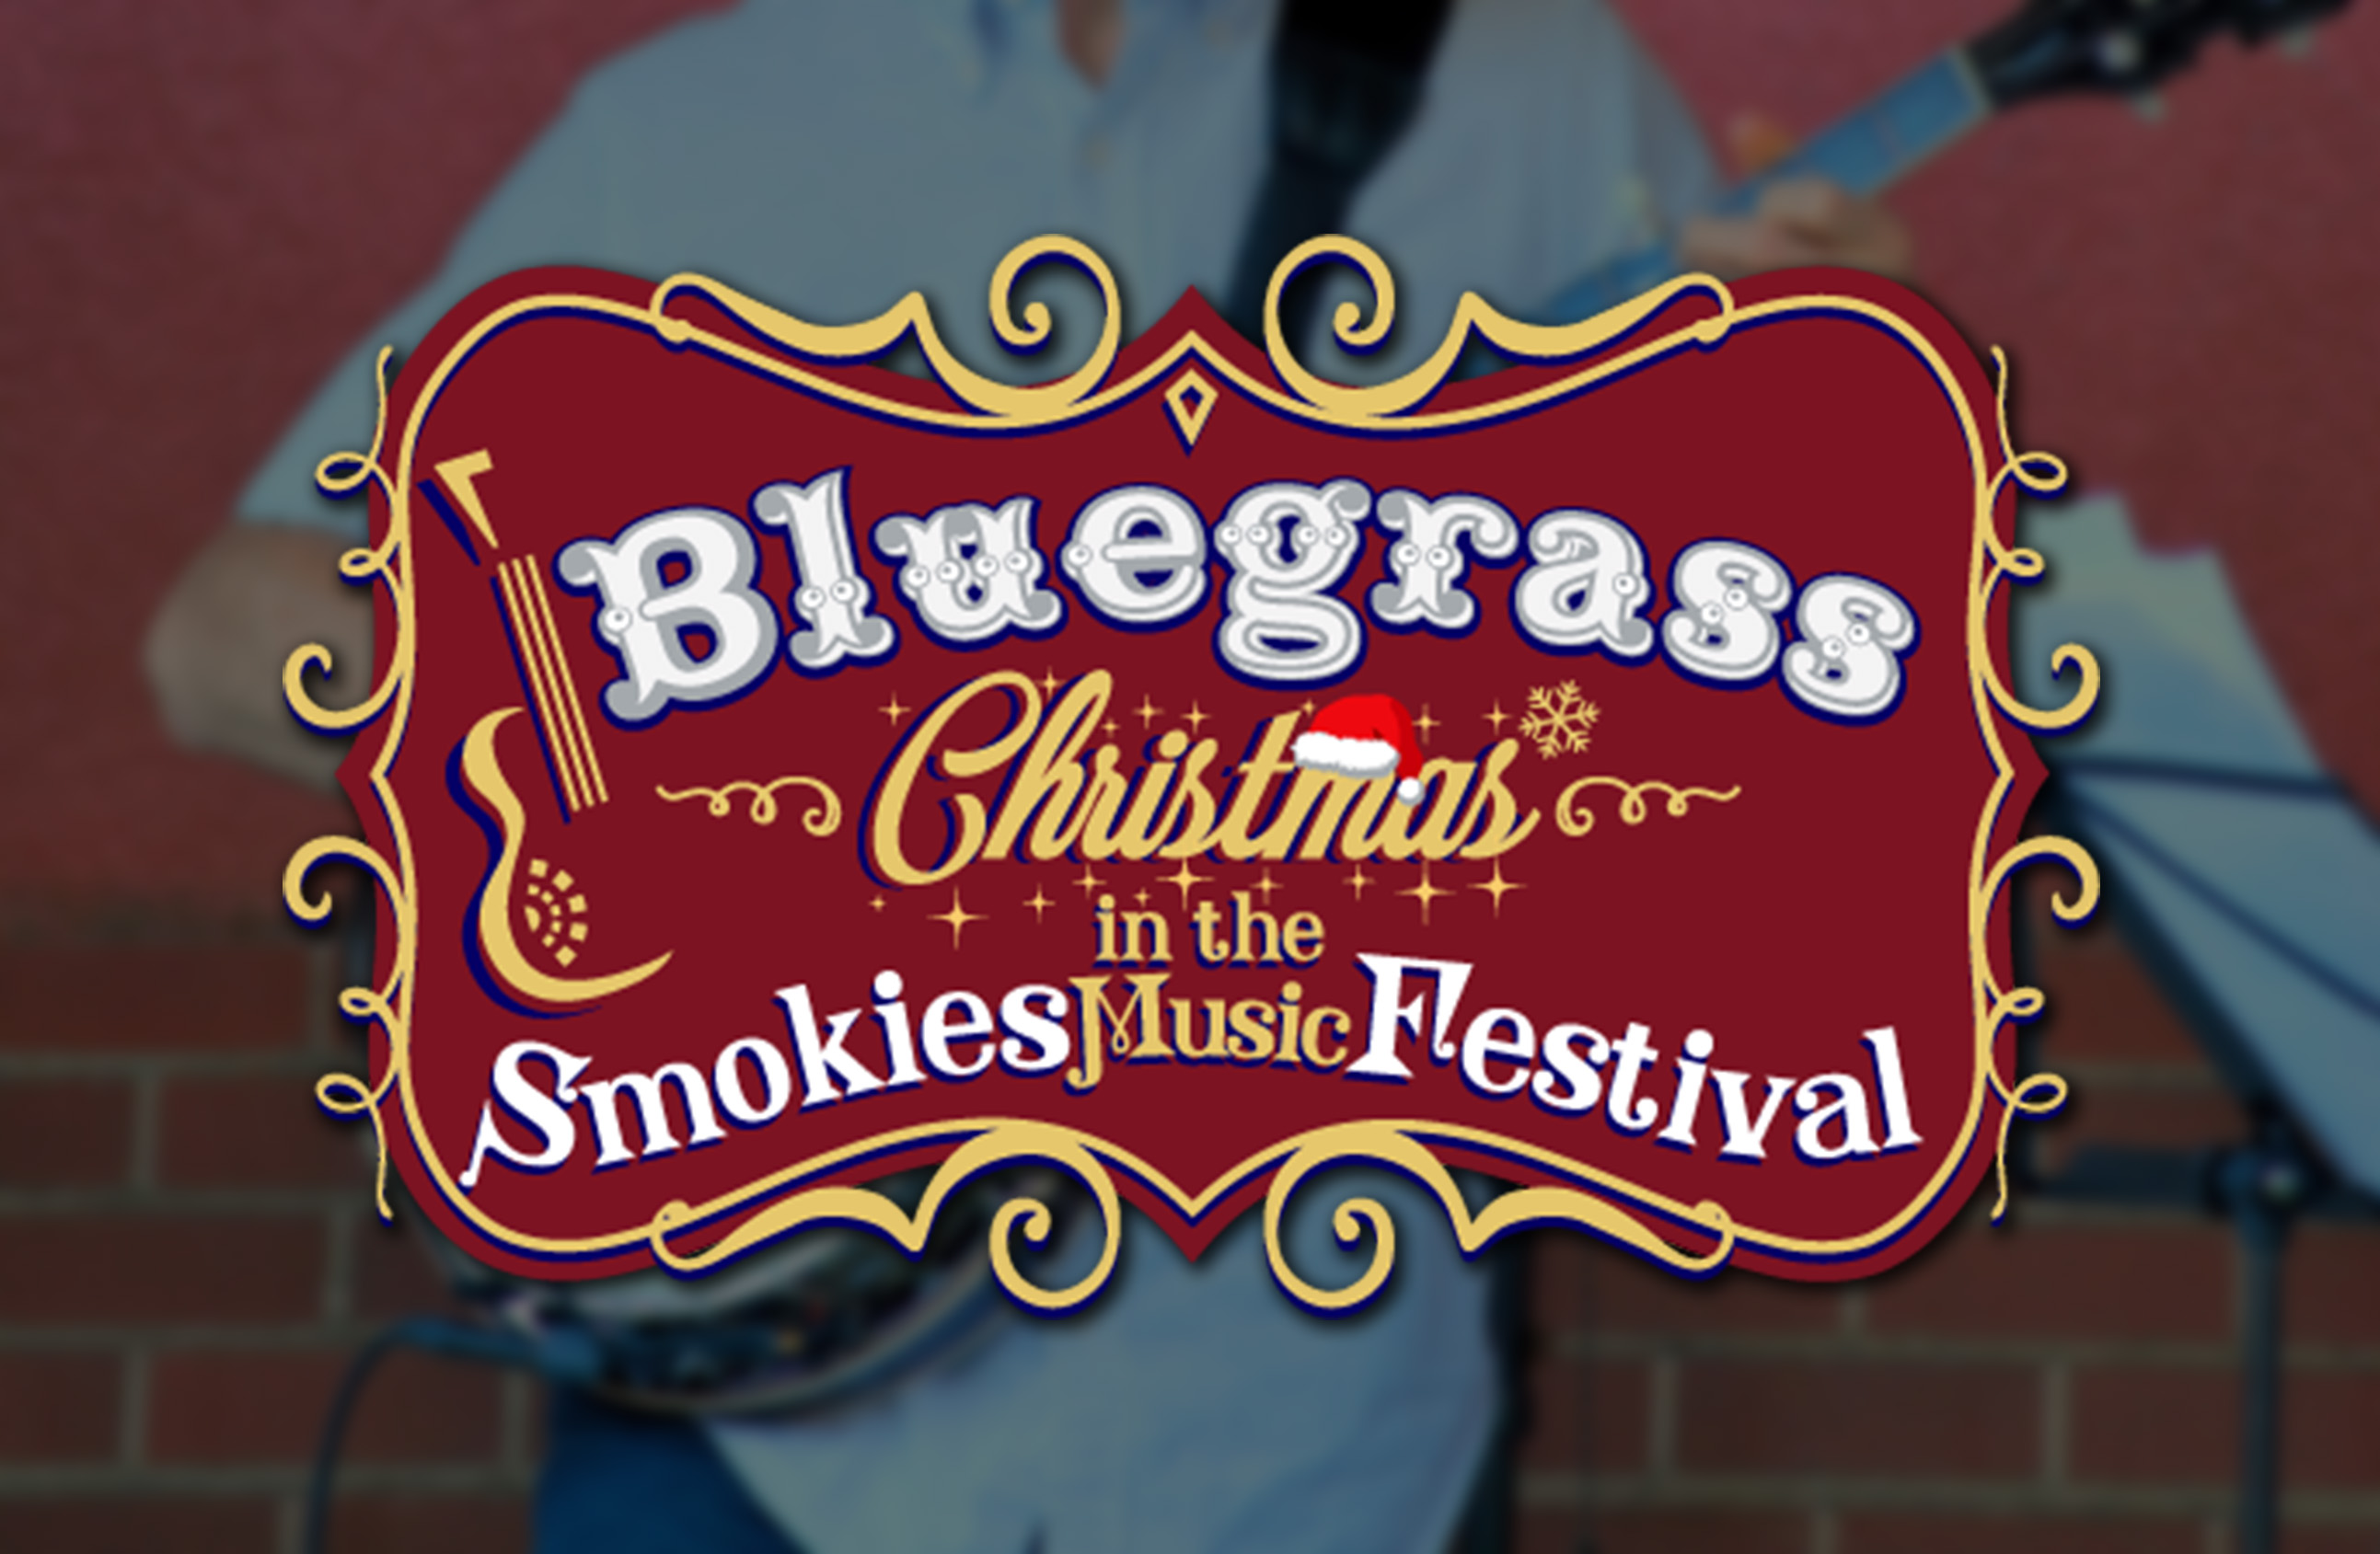 Christmas in the Smokies Bluegrass Festival – December 11th through 14th